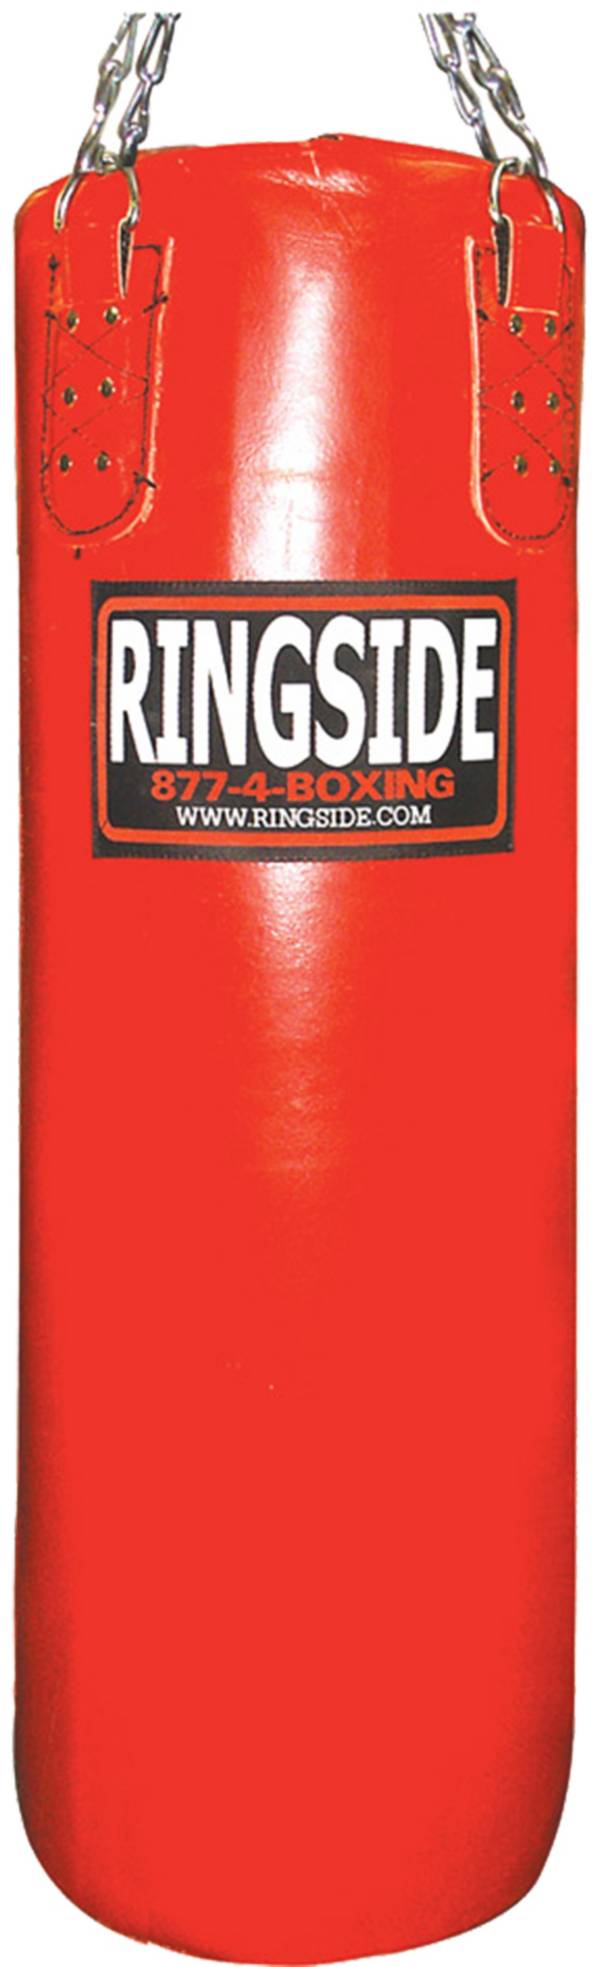 Ringside Unfilled Leather Heavy Bag product image